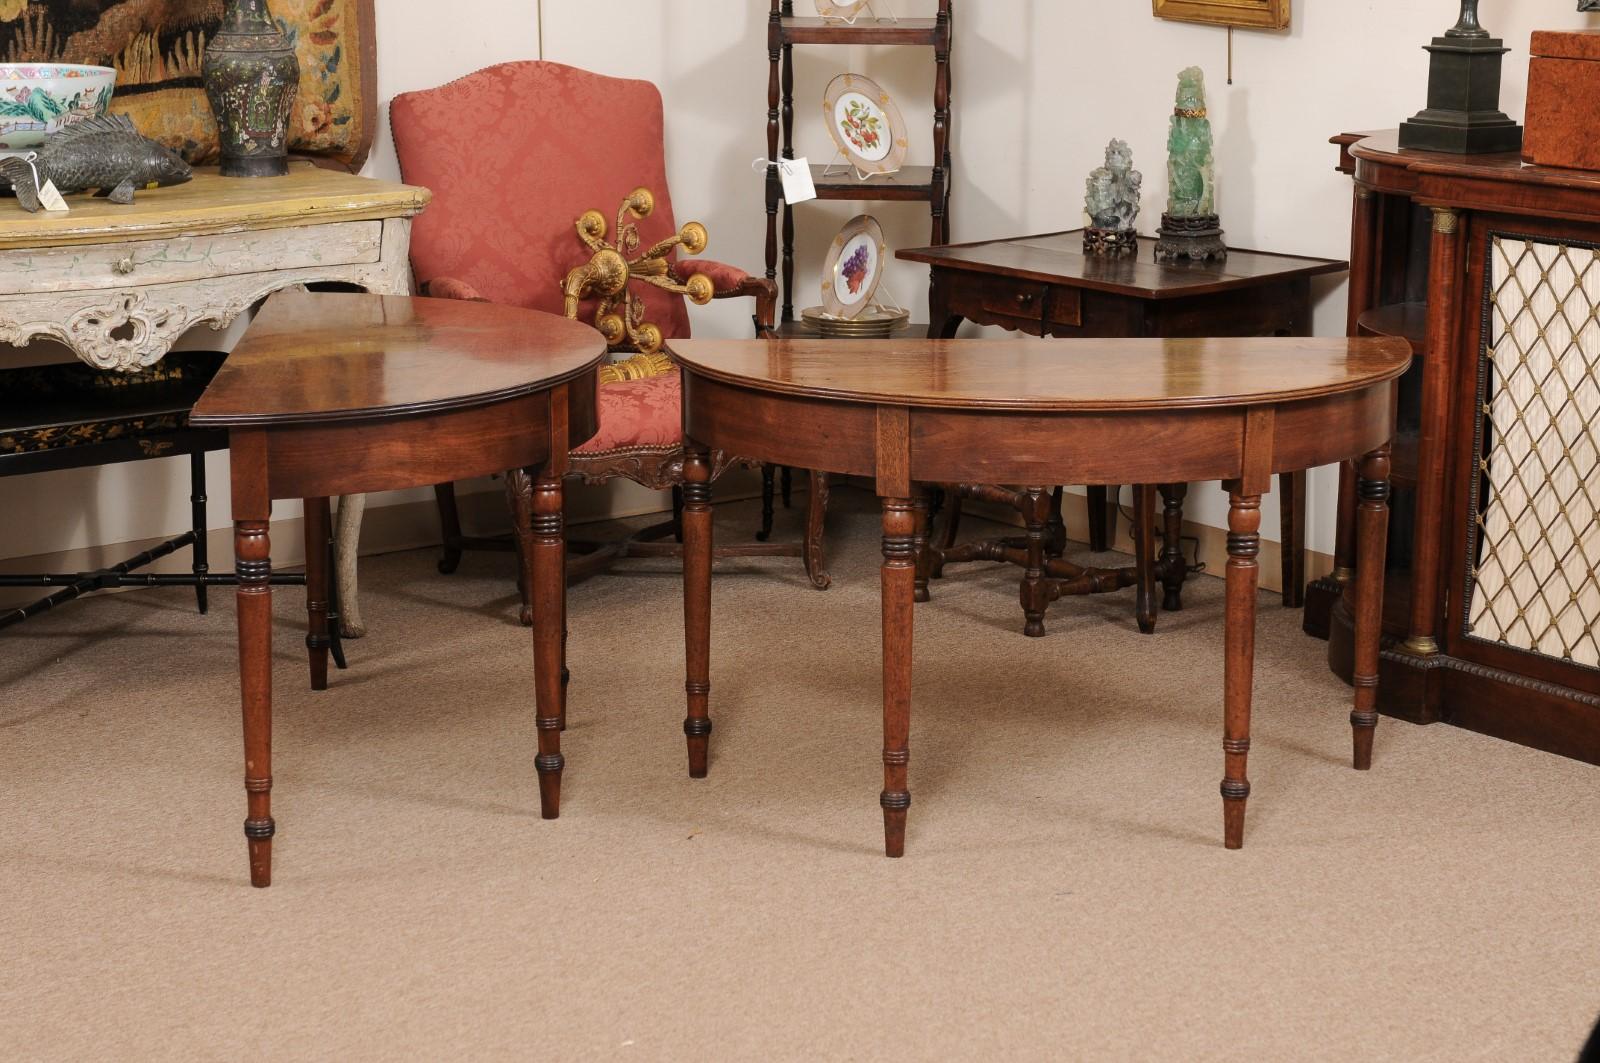  Pair of English Mahogany Demilune Console Tables with Turned Legs For Sale 6